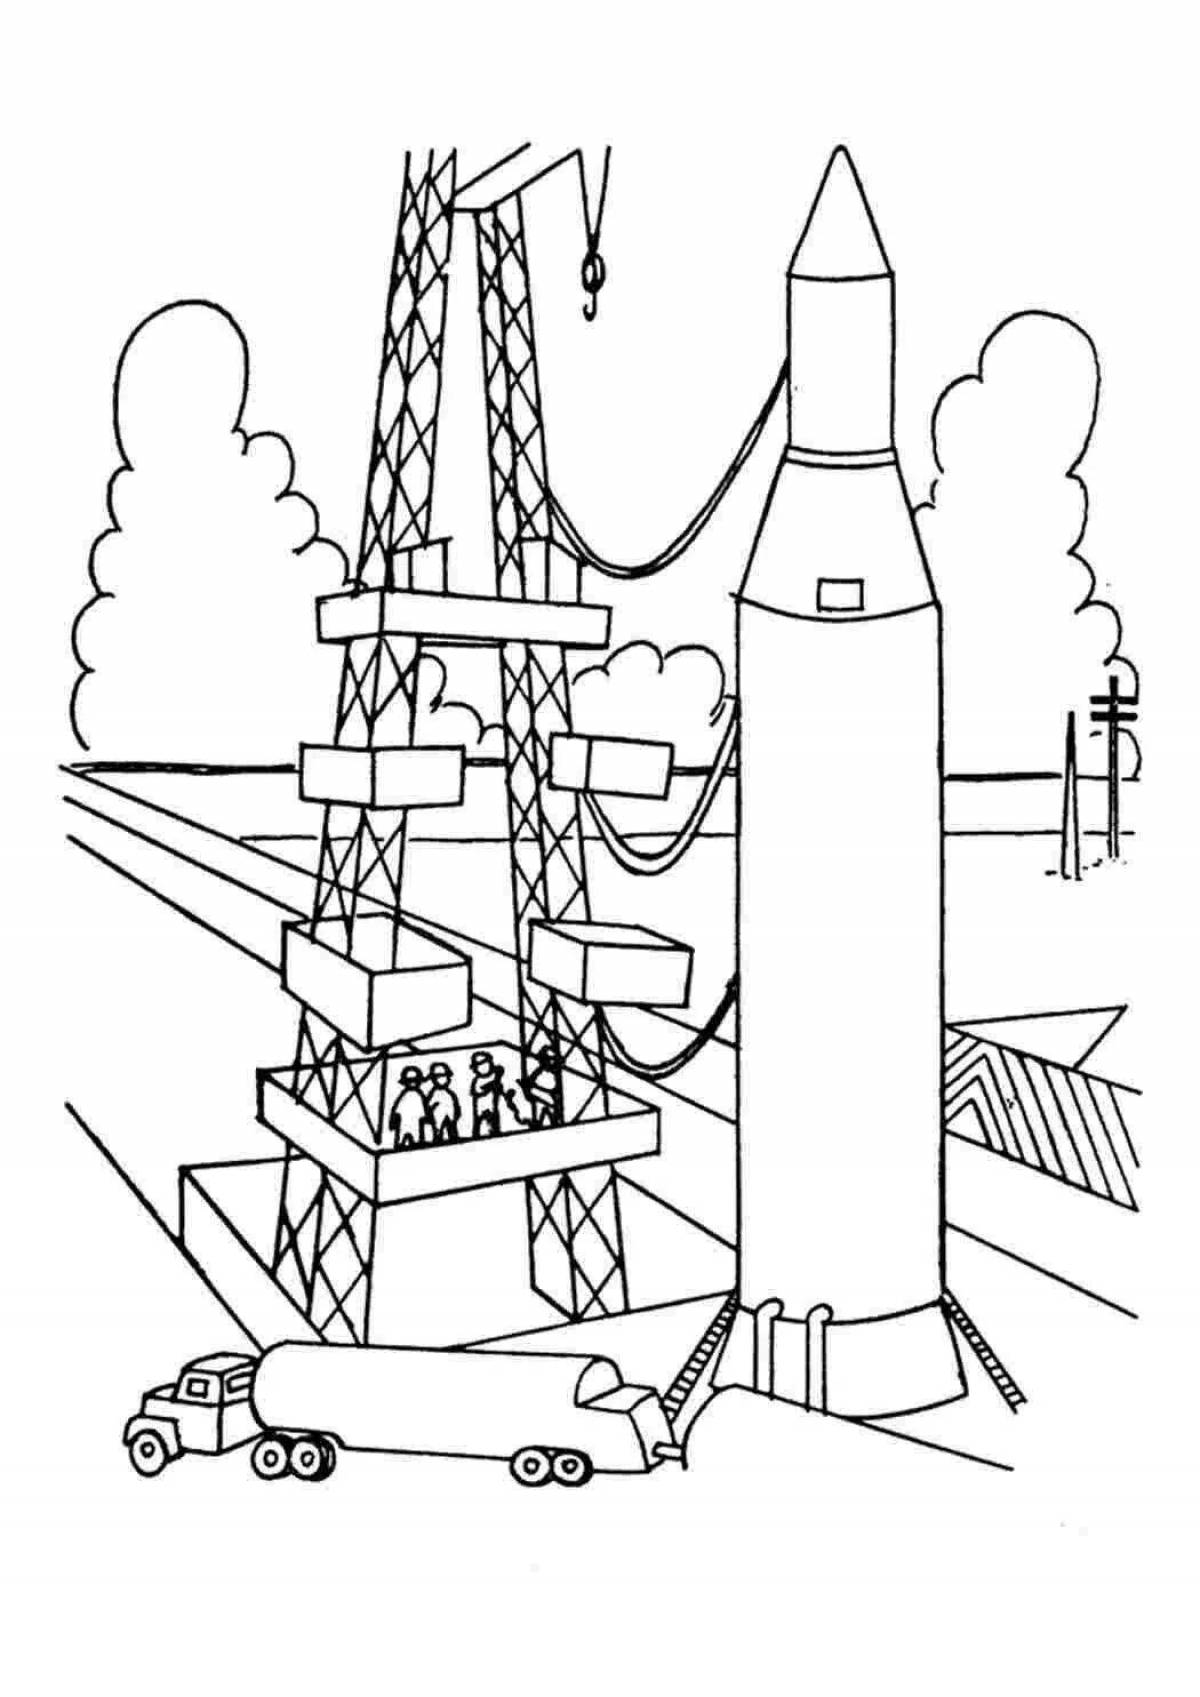 Striking missile coloring page for boys